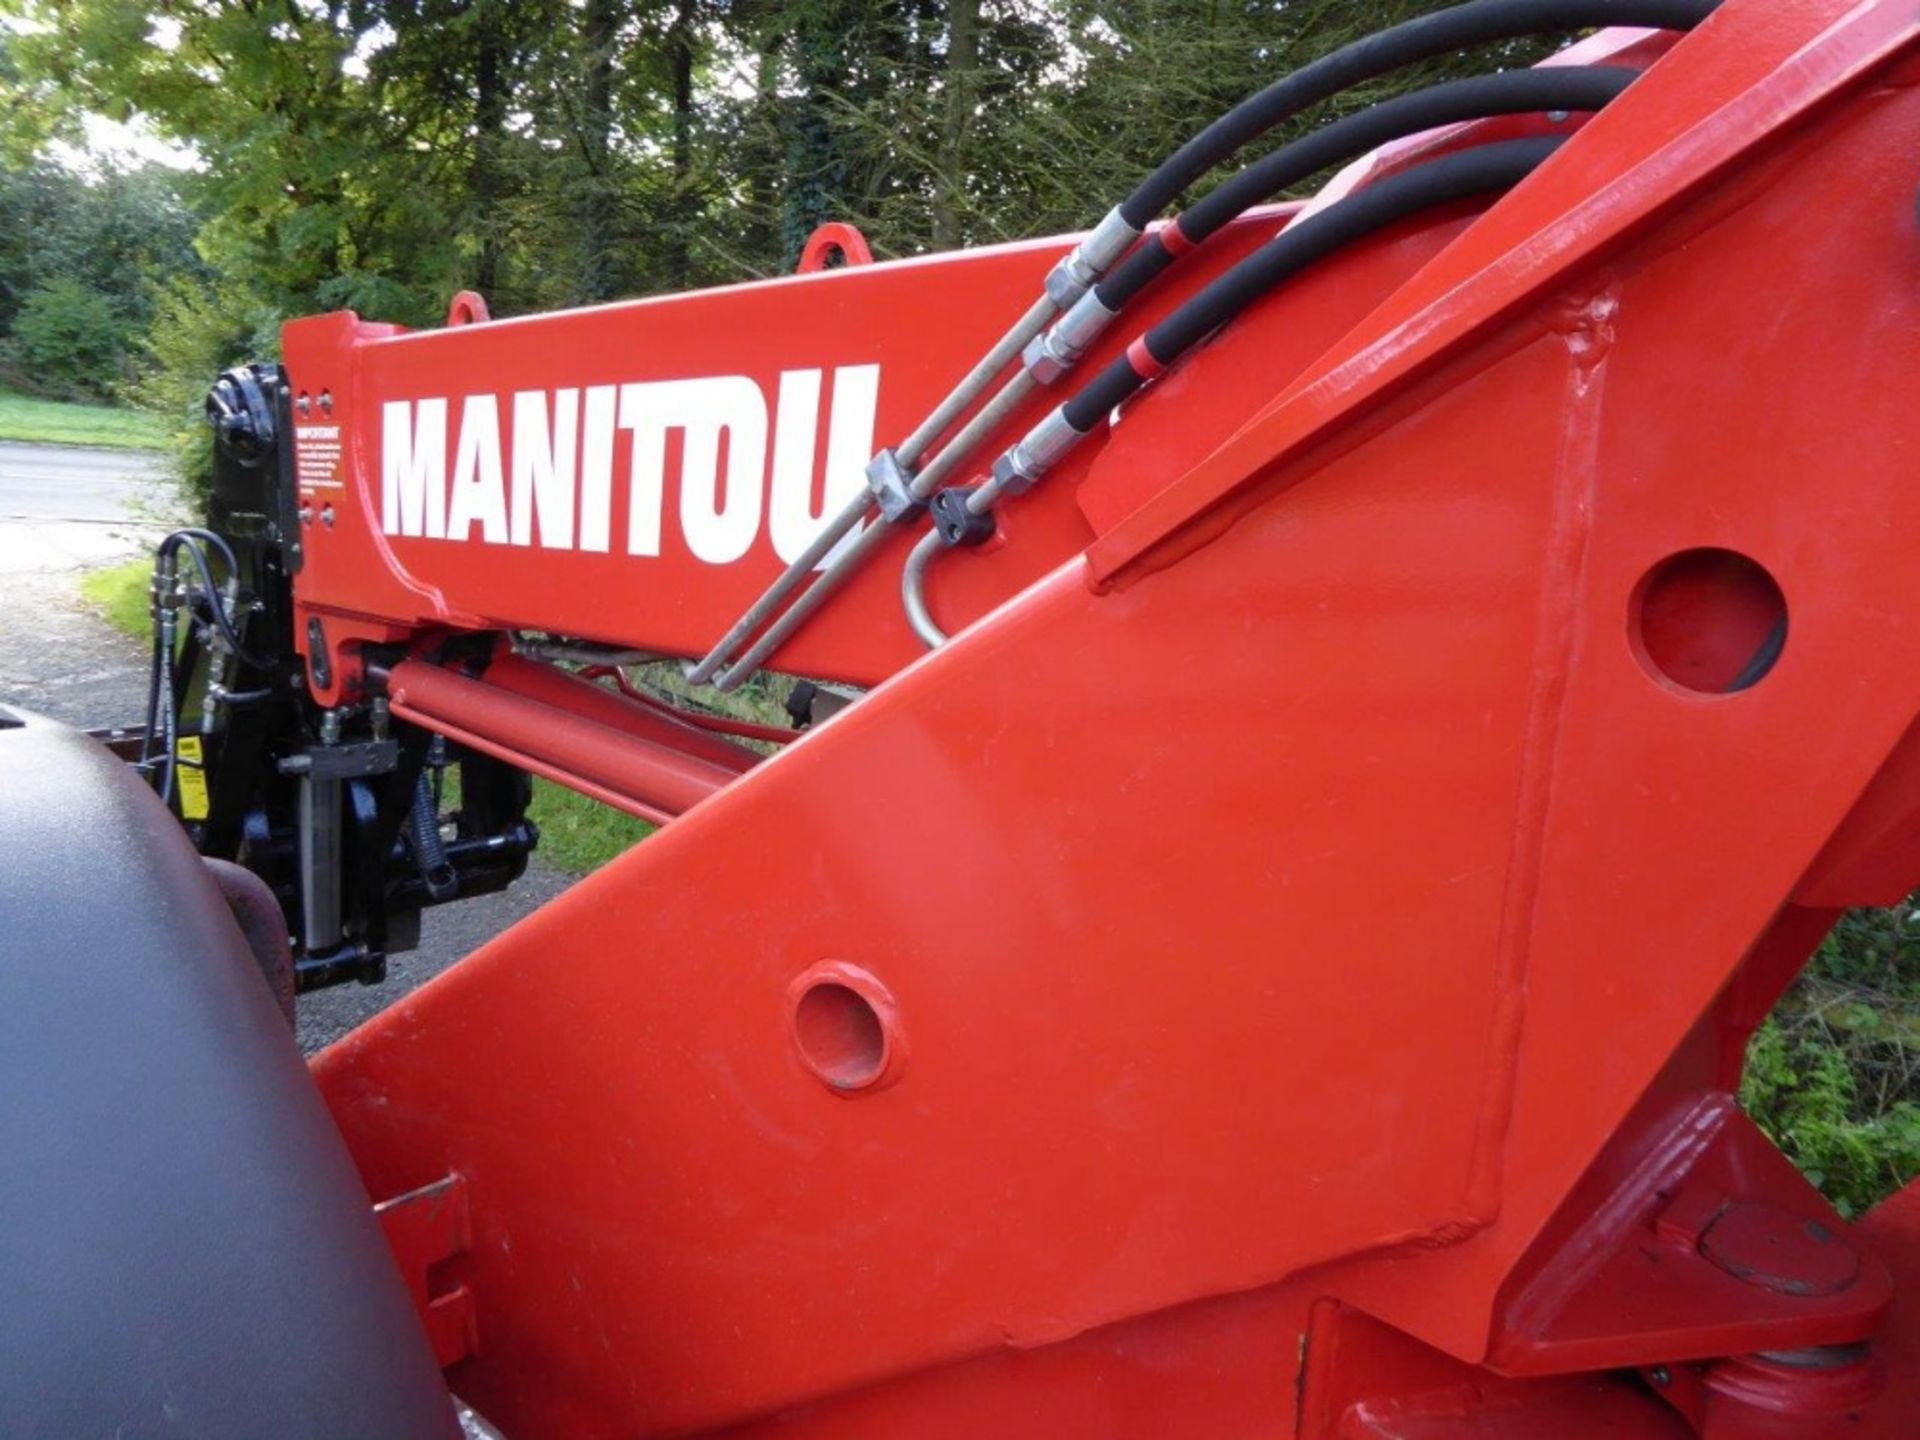 2009 Manitou Maniscopic MLA 628 LSU CRC Powershift, with Pallet Forks, one owner from new - Image 3 of 6